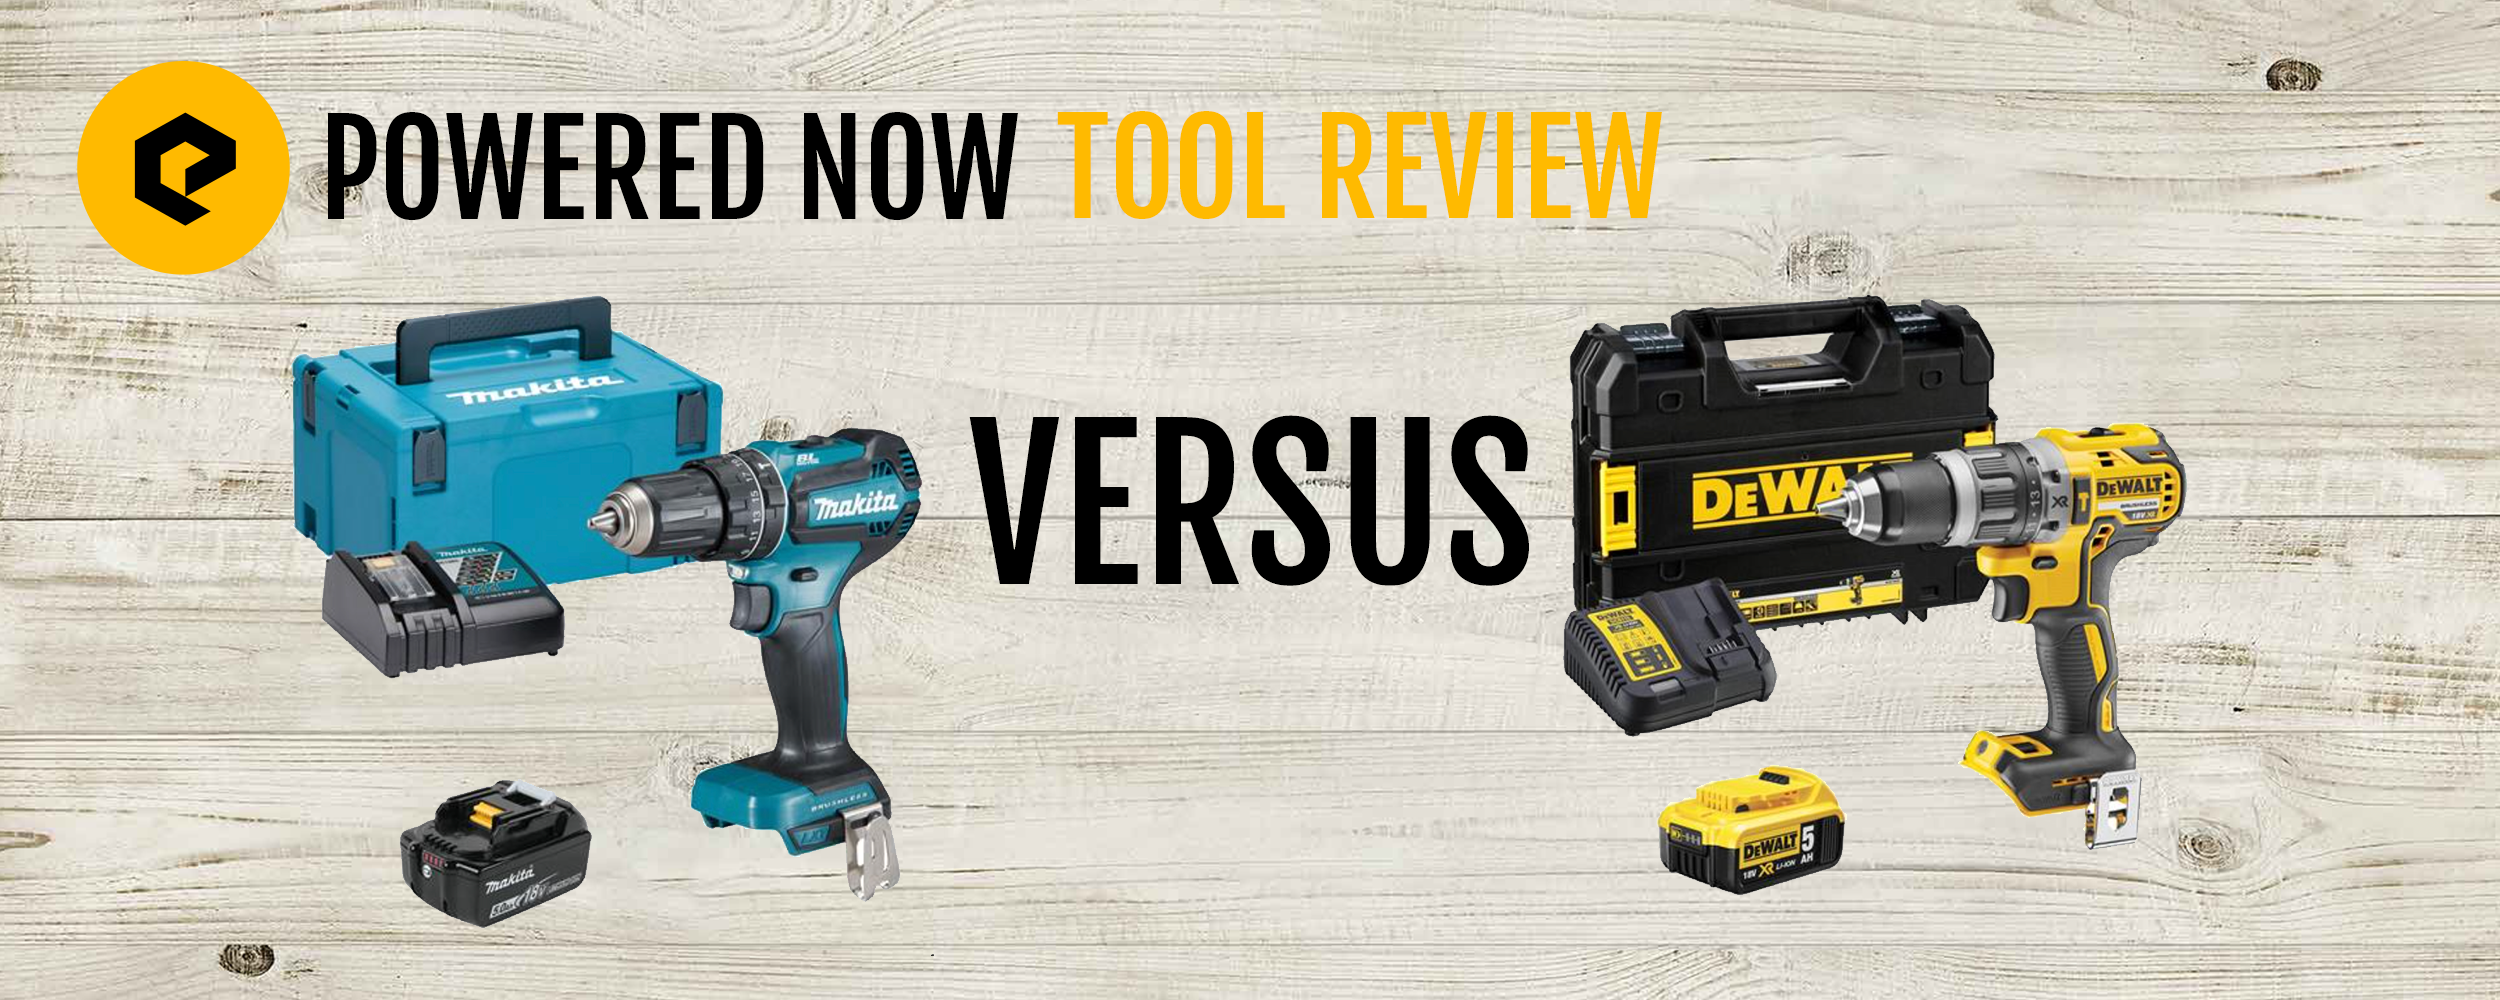 fossil Perforering Påstand Makita v's DeWalt Review - Which is the best cordless combi drill?